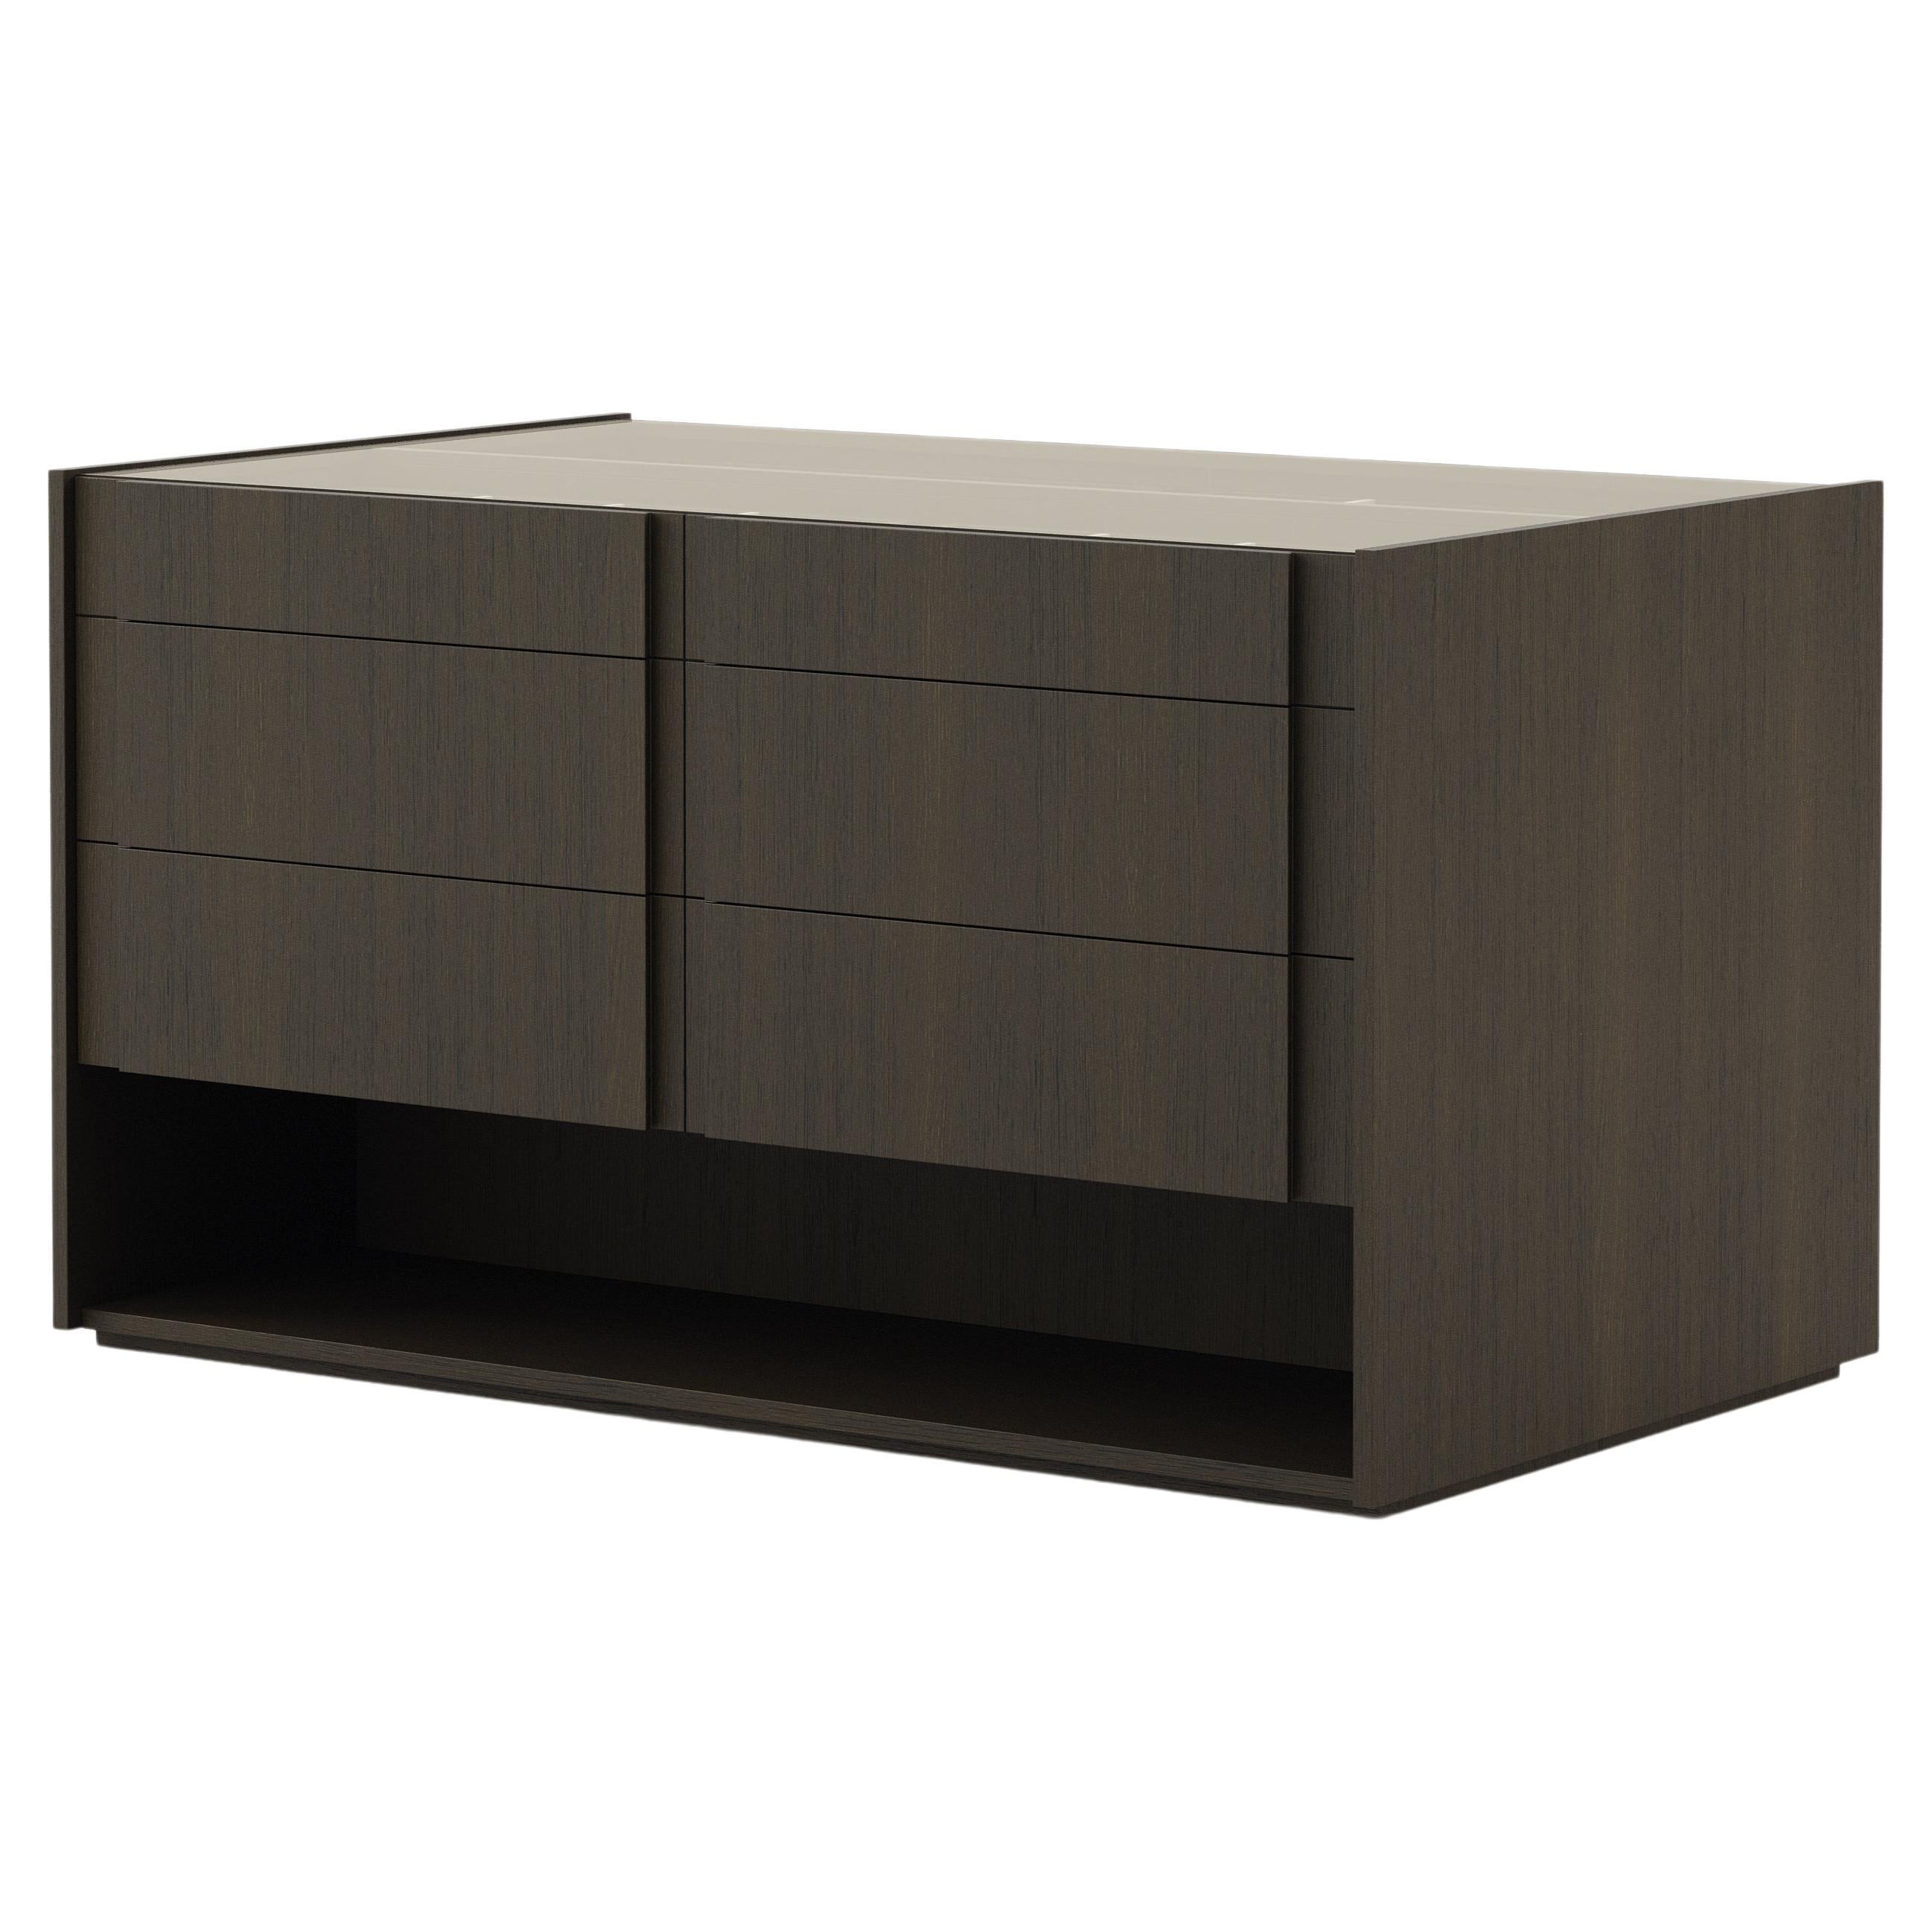 Modern Sevilha Island Chest of Drawers Made with Oak, Glass and Suede Details For Sale